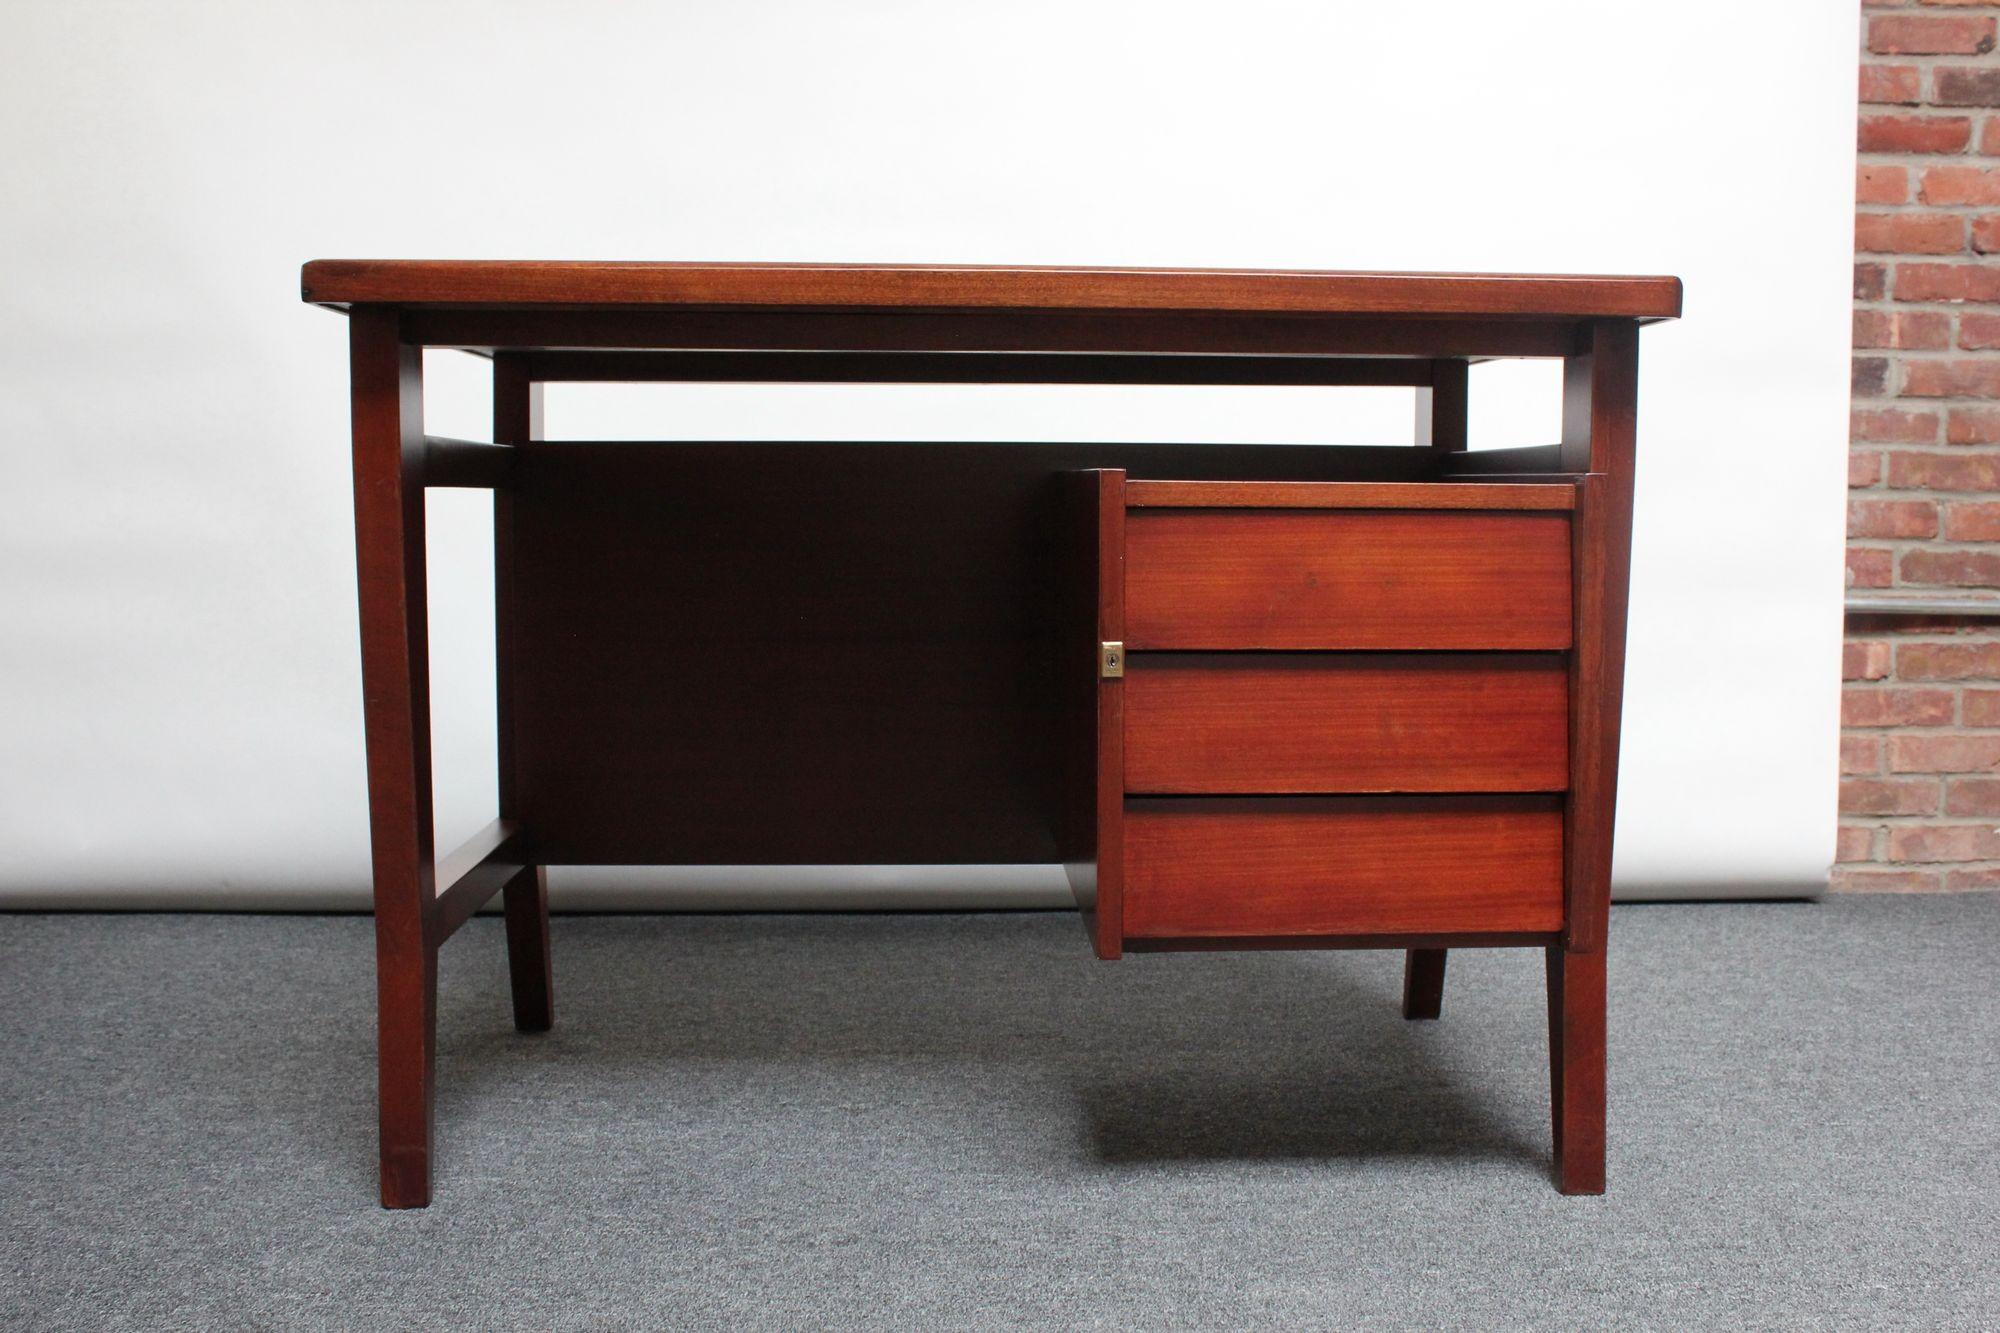 Diminutive Italian student desk in stained mahogany designed by Gio Ponti for Schirolli, ca. 1950s, Italy. Sculptural form with angular leg details, presenting a sharp profile.
There are three drawers and an additional open storage section created